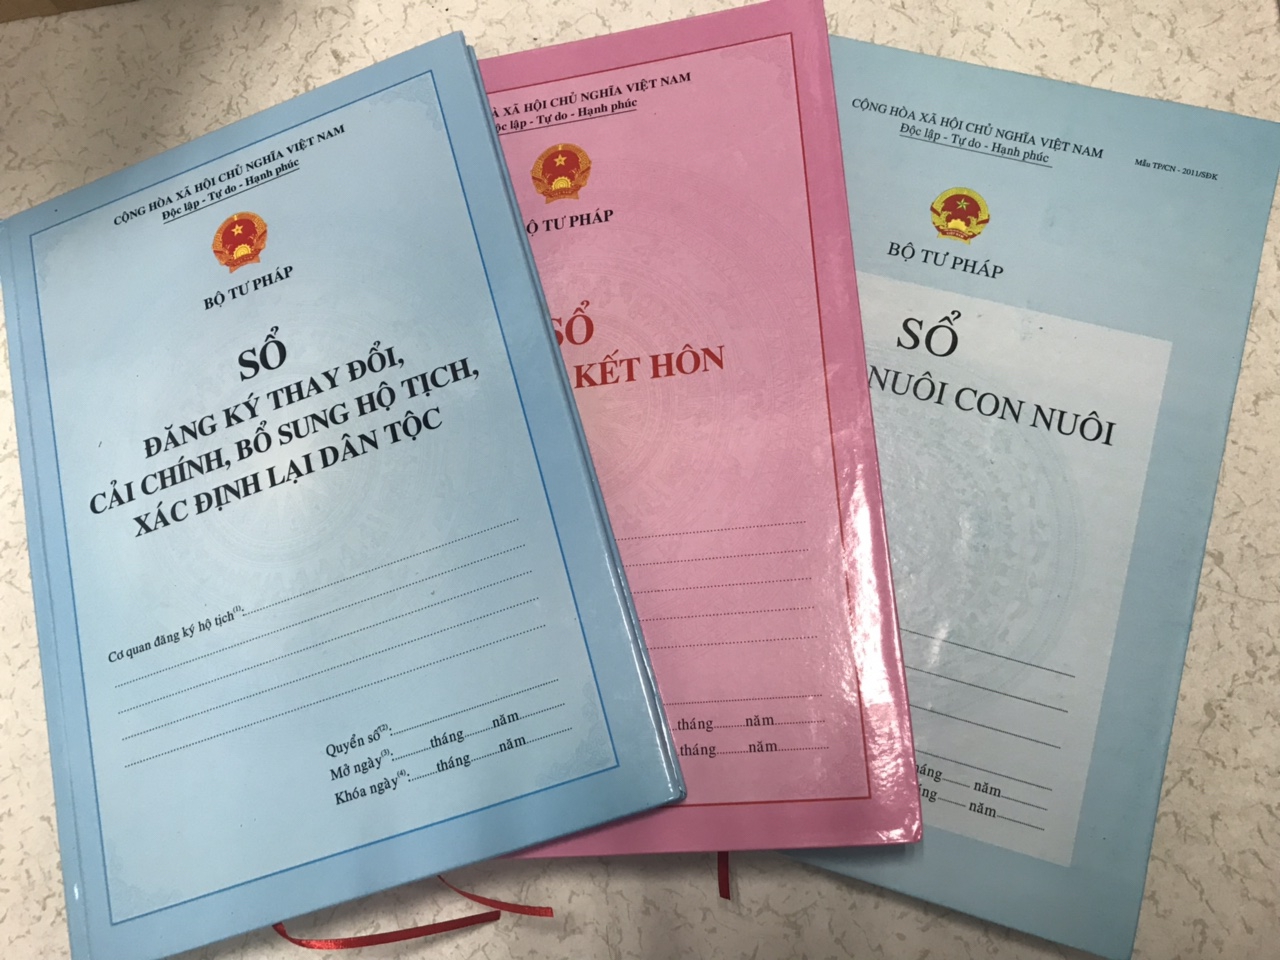 Which agency has the competence to register civil status in Vietnam?